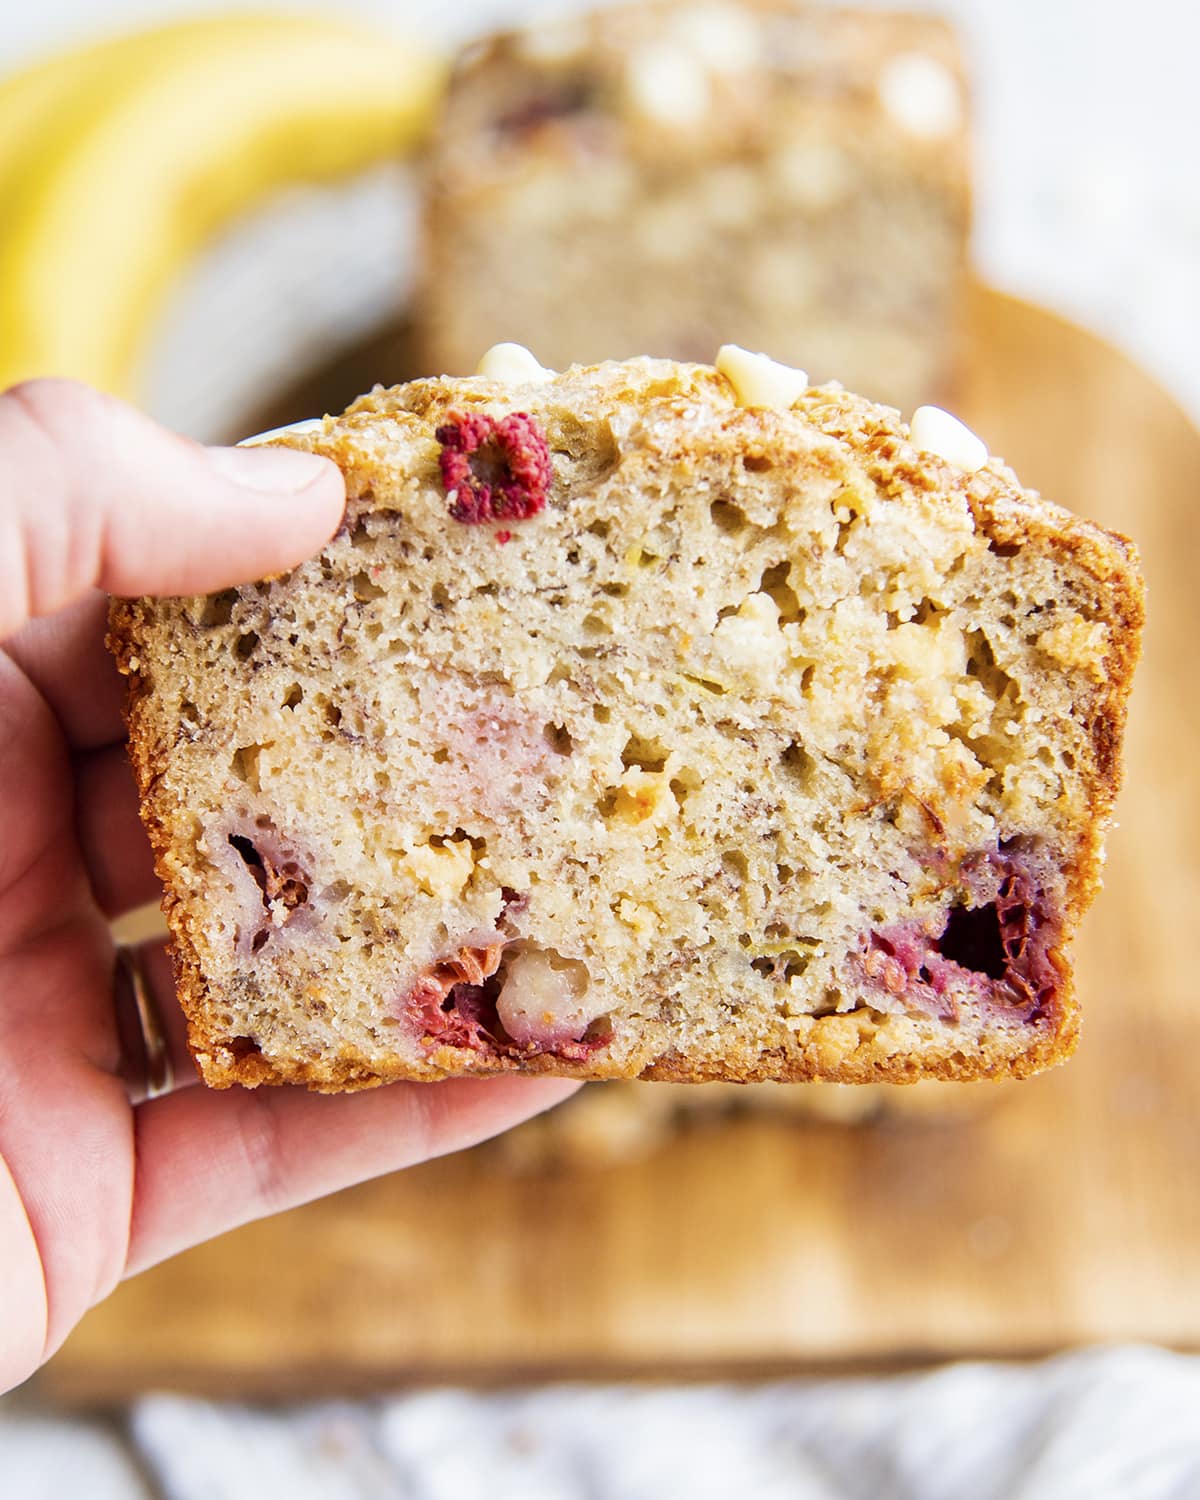 A hand holding a slice of banana bread with pieces of raspberries and white chocolate chips in it.